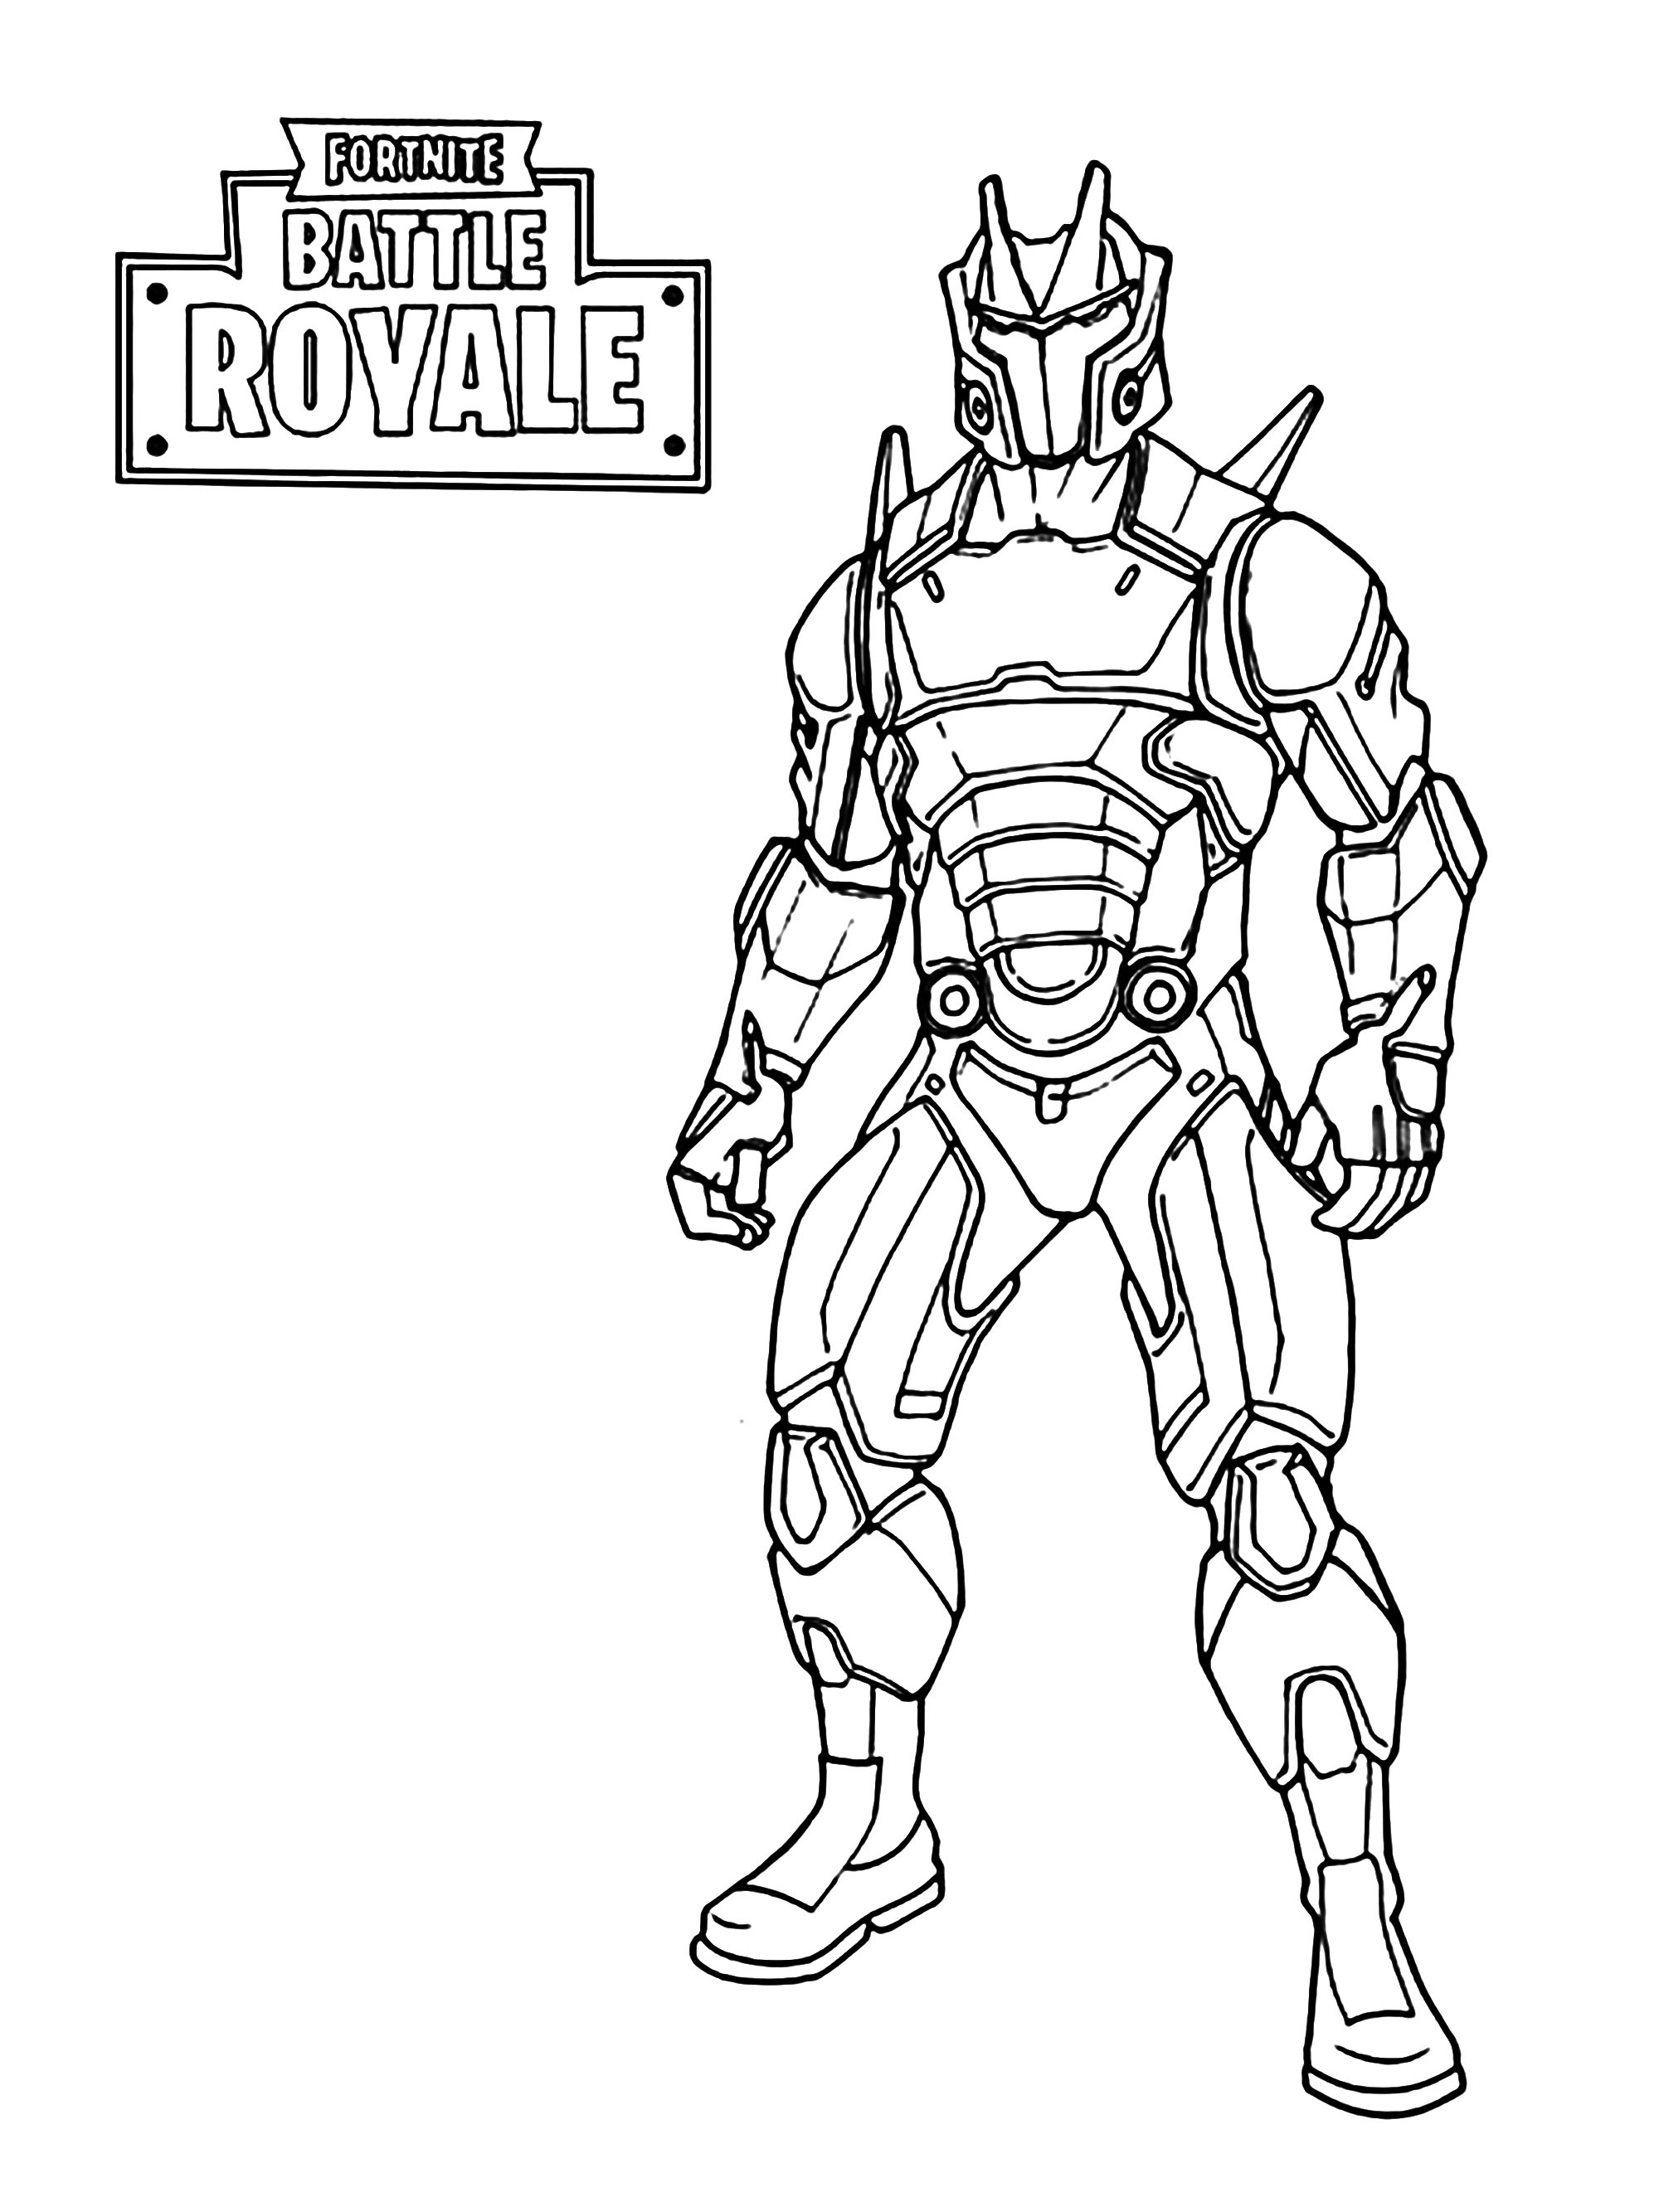 Download Fortnite Coloring Pages Omega - Coloring Pages Kids 2019